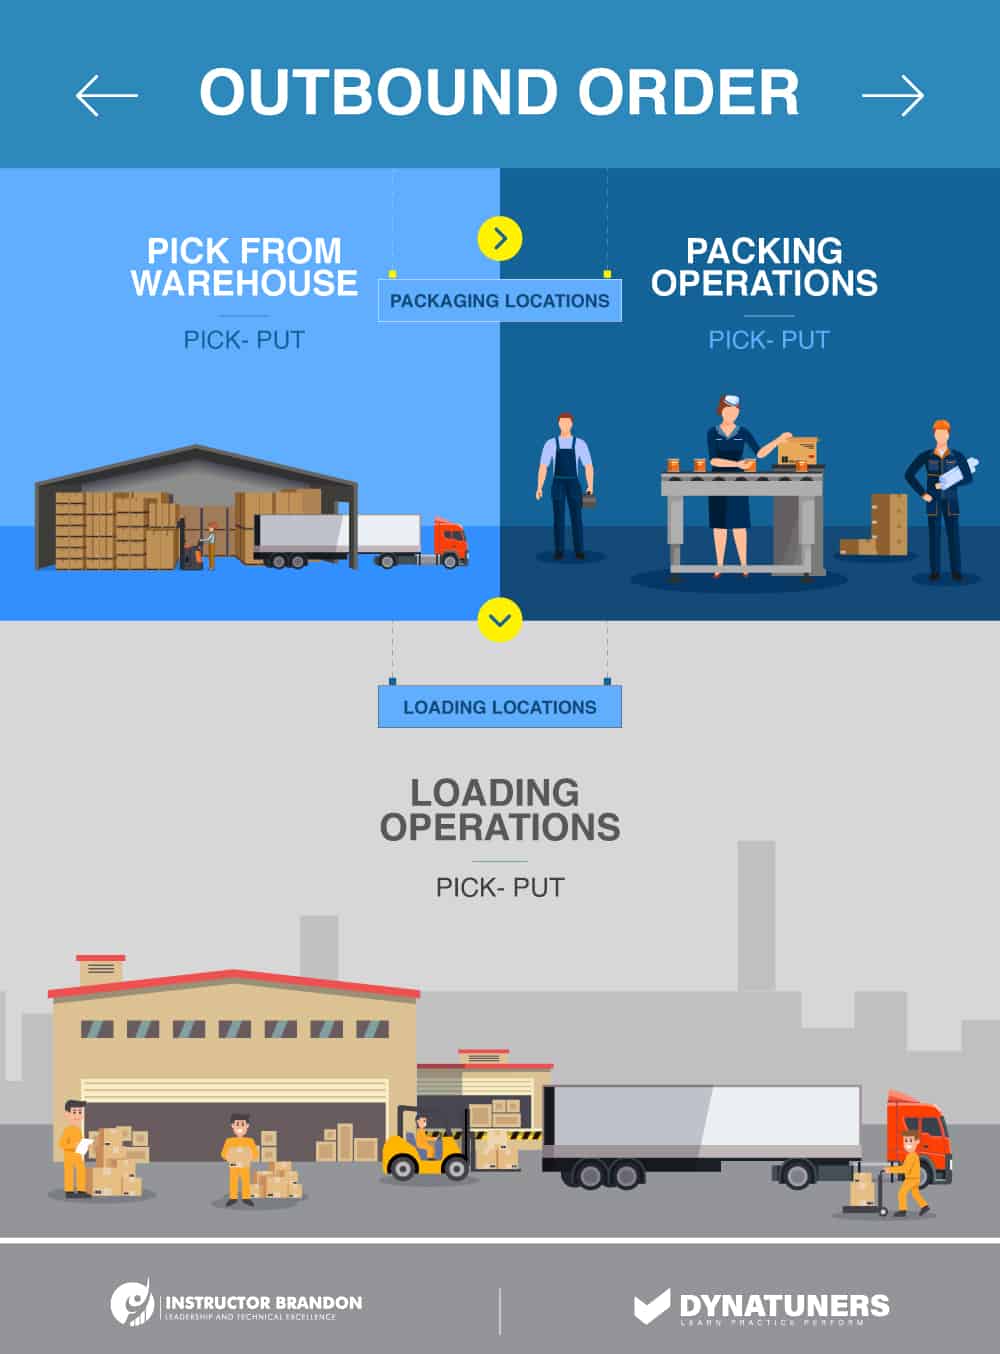 Understanding Mobile Devices for Warehouse Outbound shipment